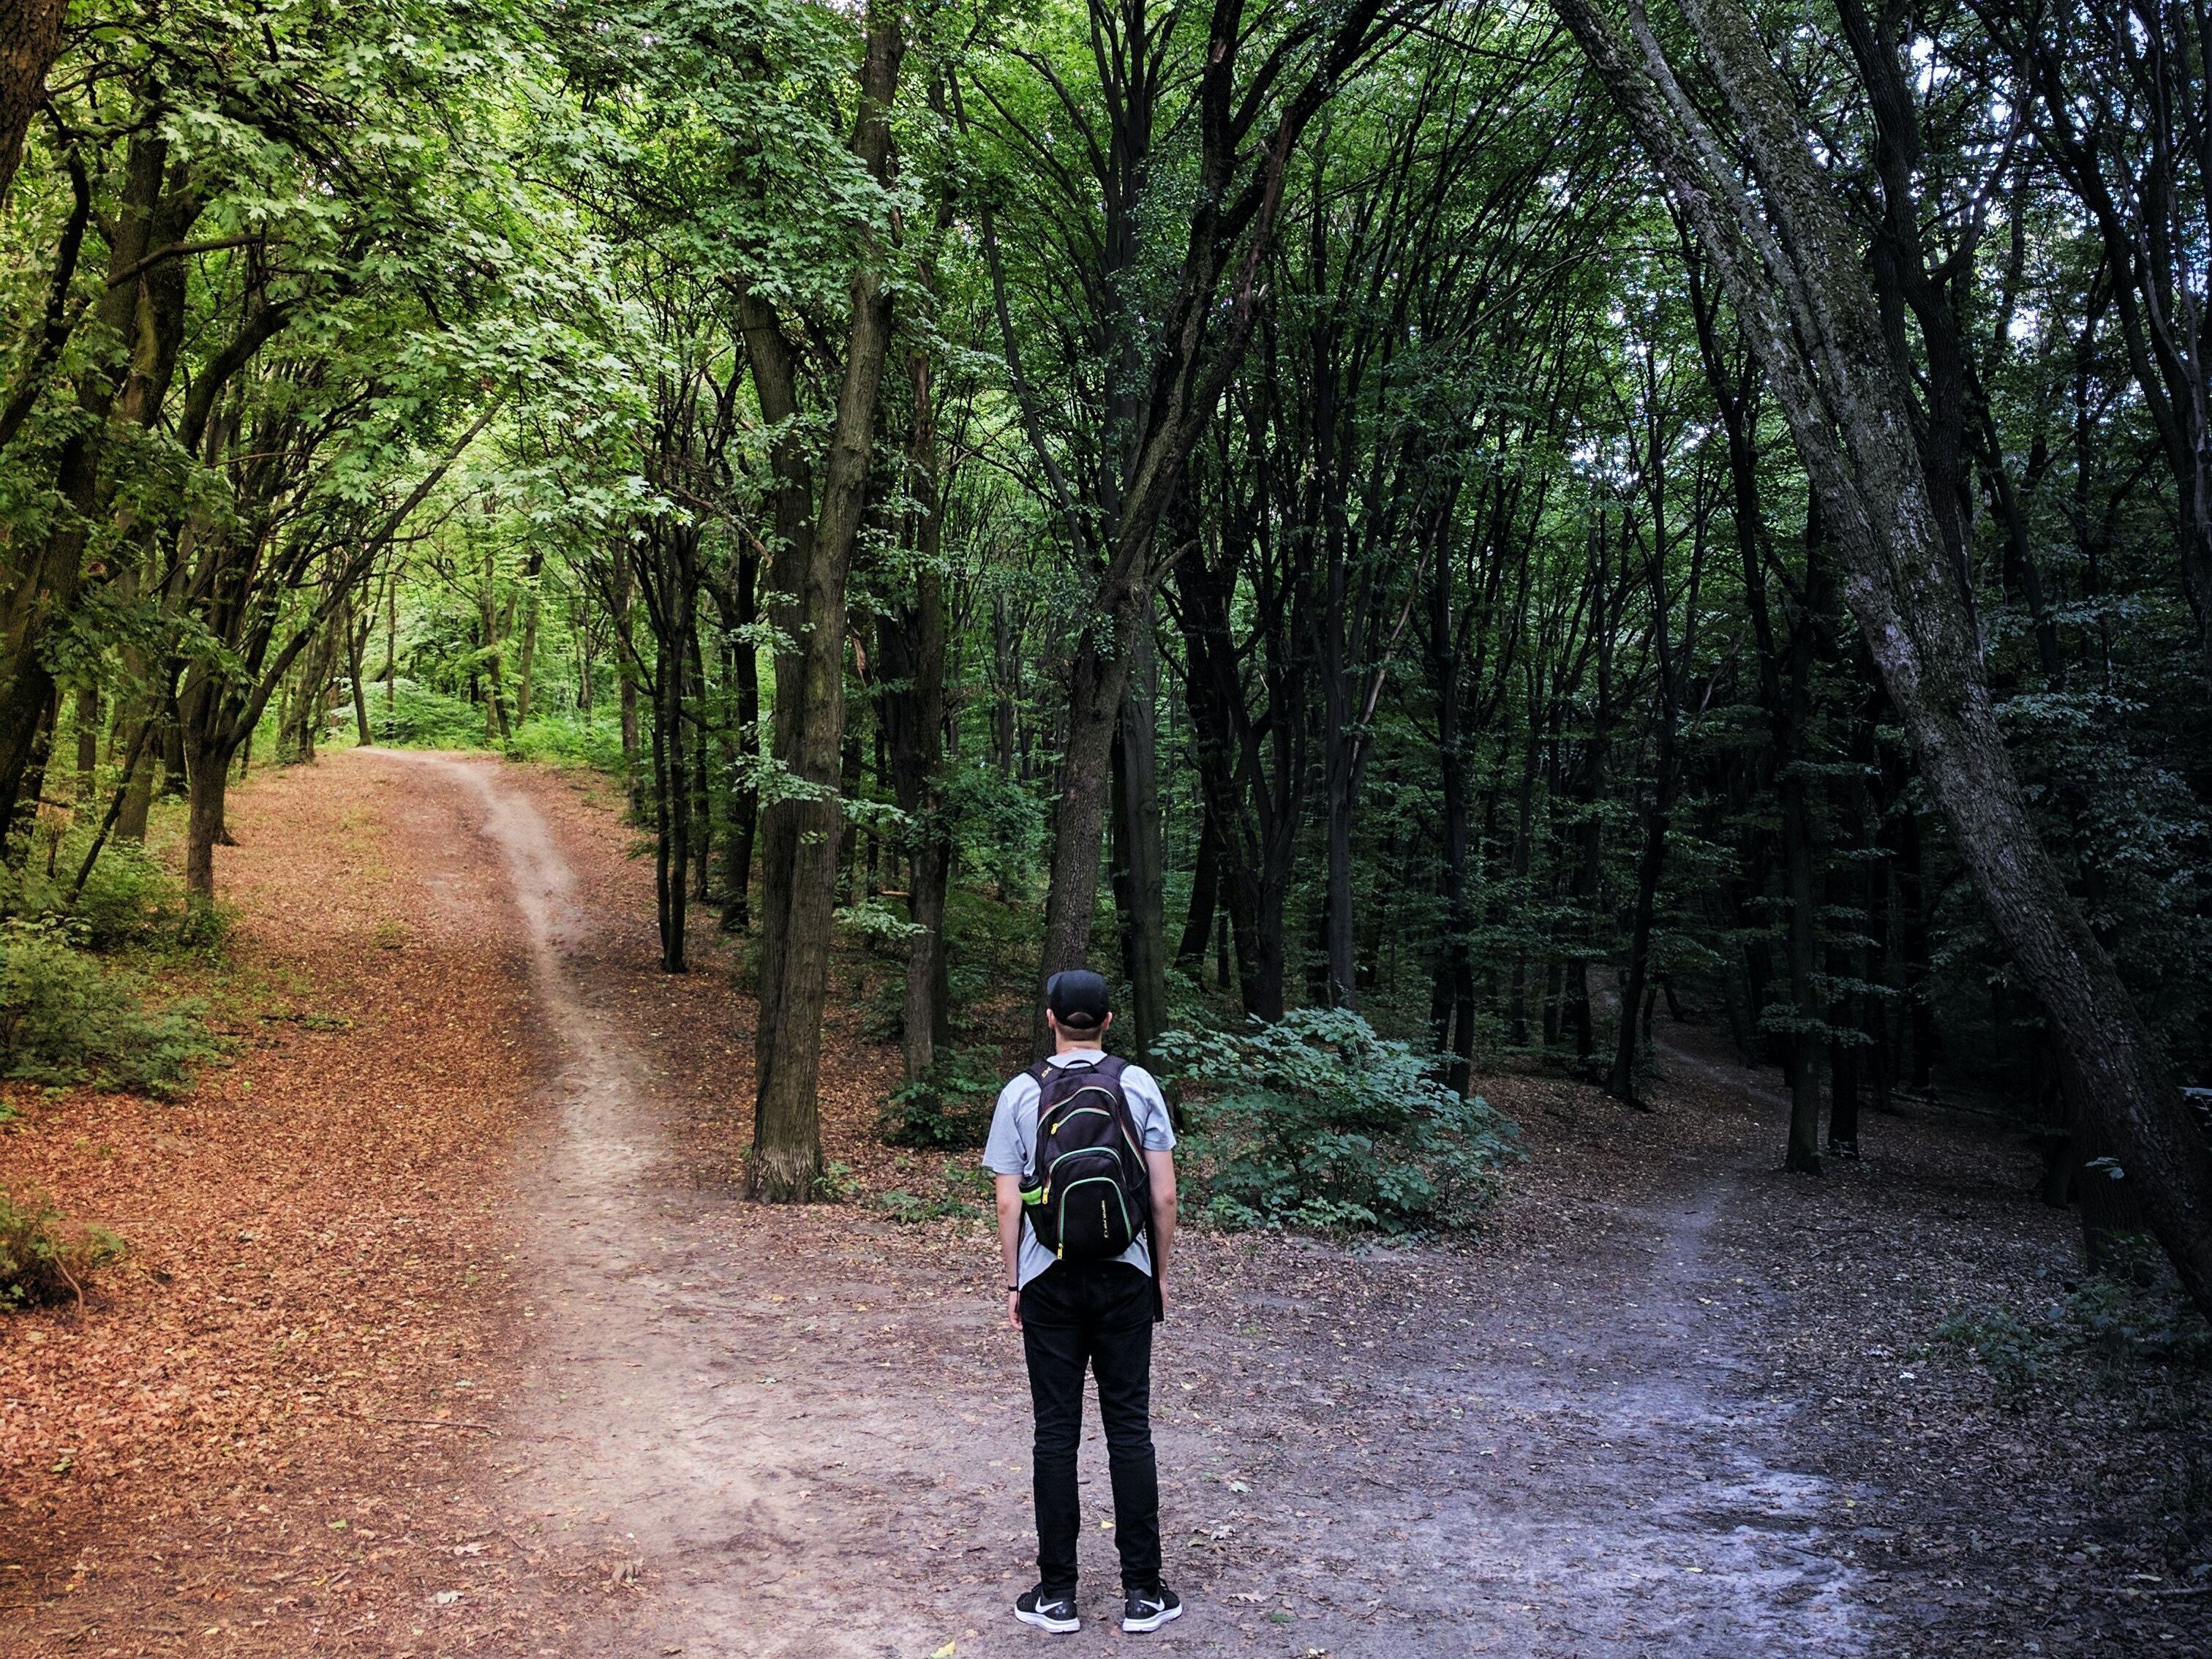 A man in a woods deciding which path to take